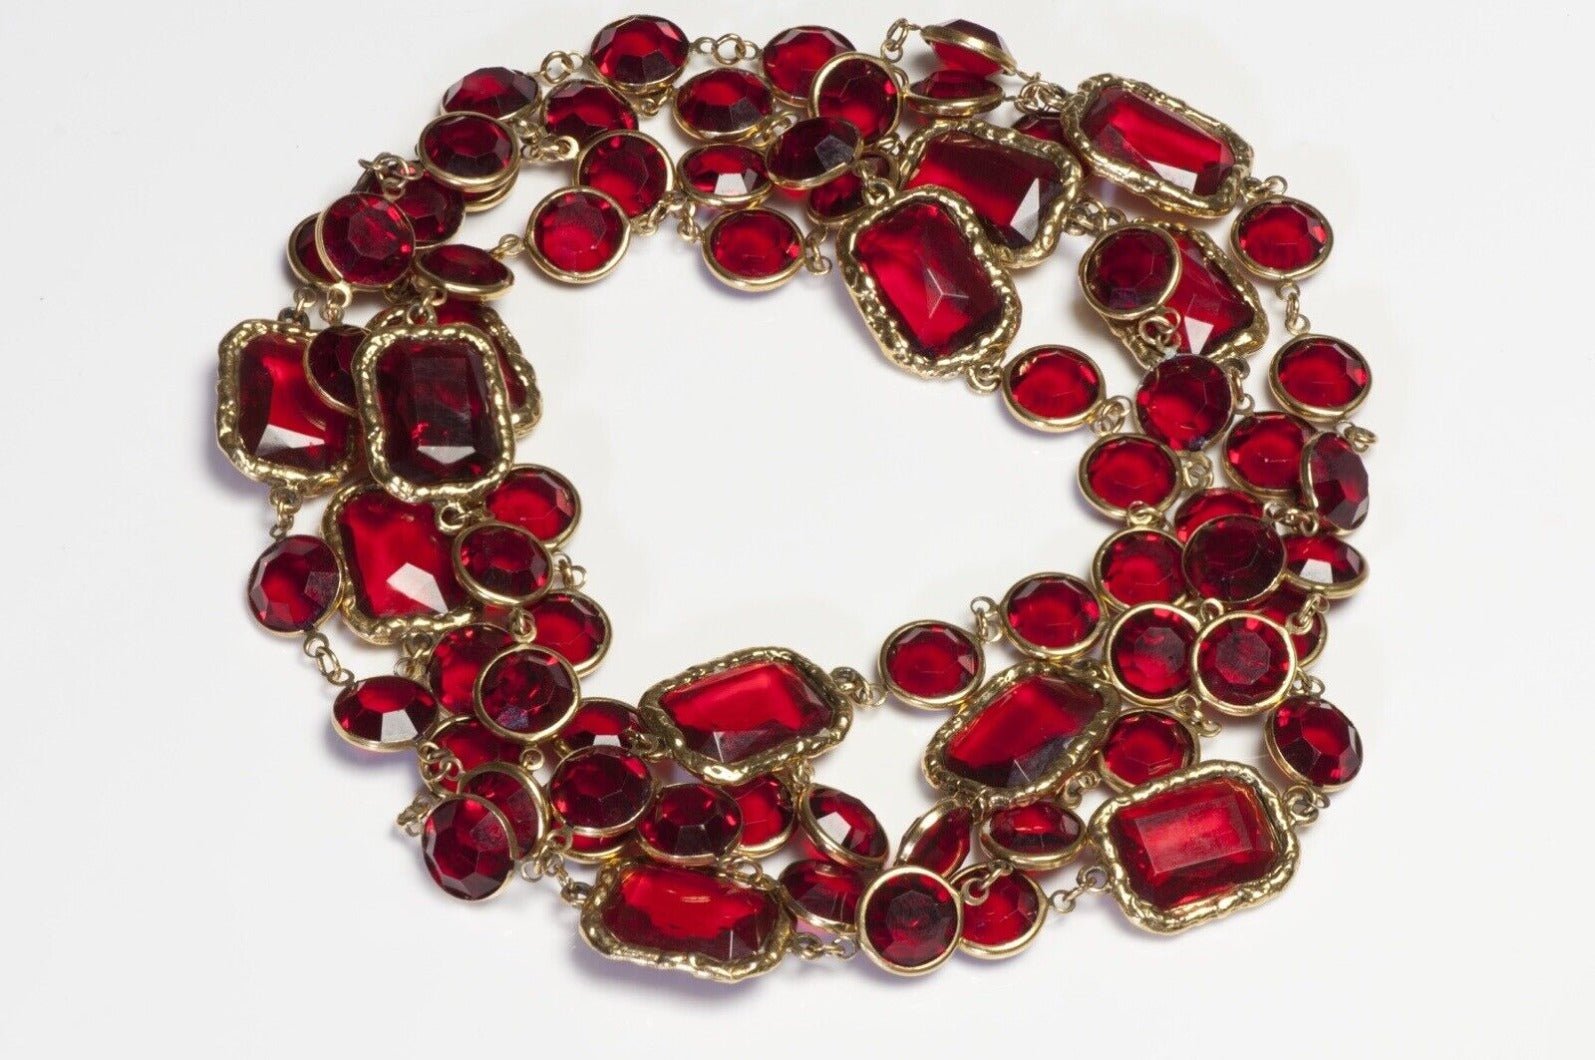 Vintage 1981 Chanel Paris Red Crystal Chiclet Chain Sautoir Necklace